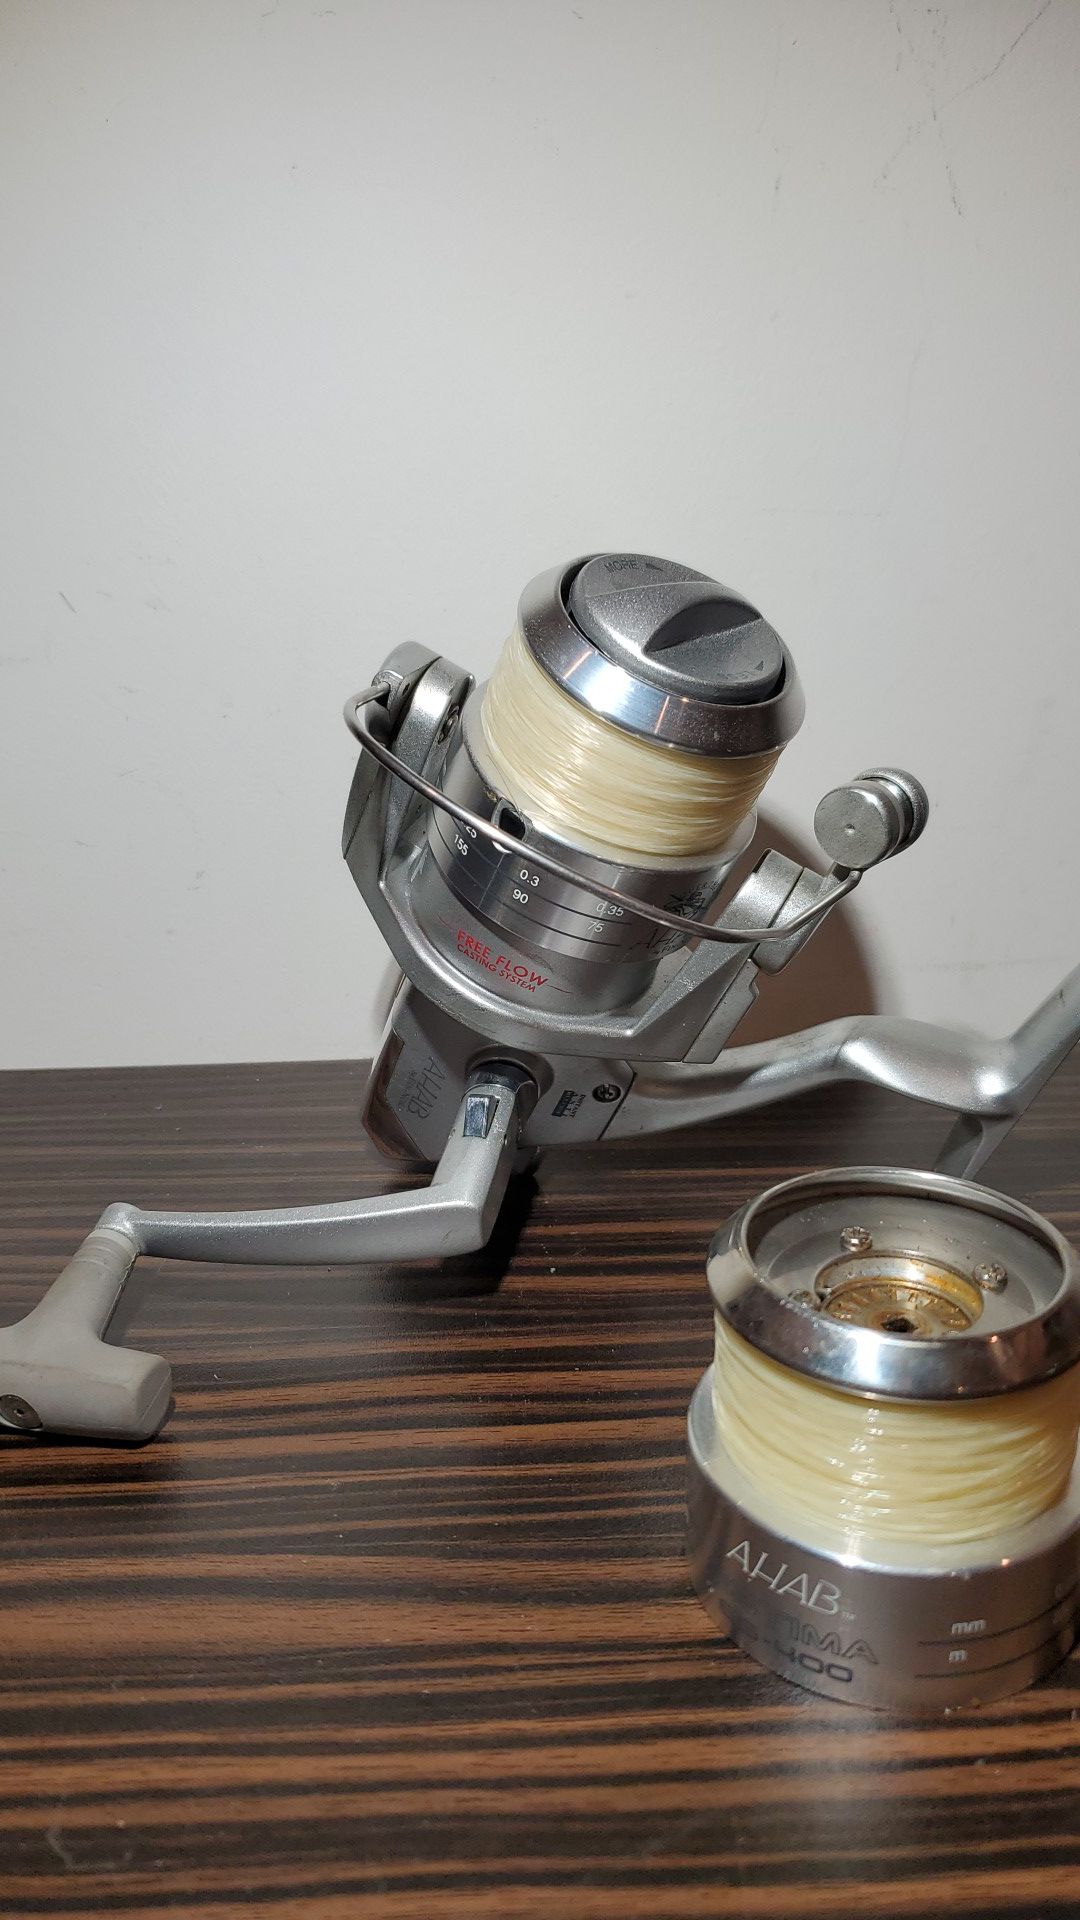 Fin Nor AHAB Estima ES-400 Fishing Reel with Extra Spool very smooth